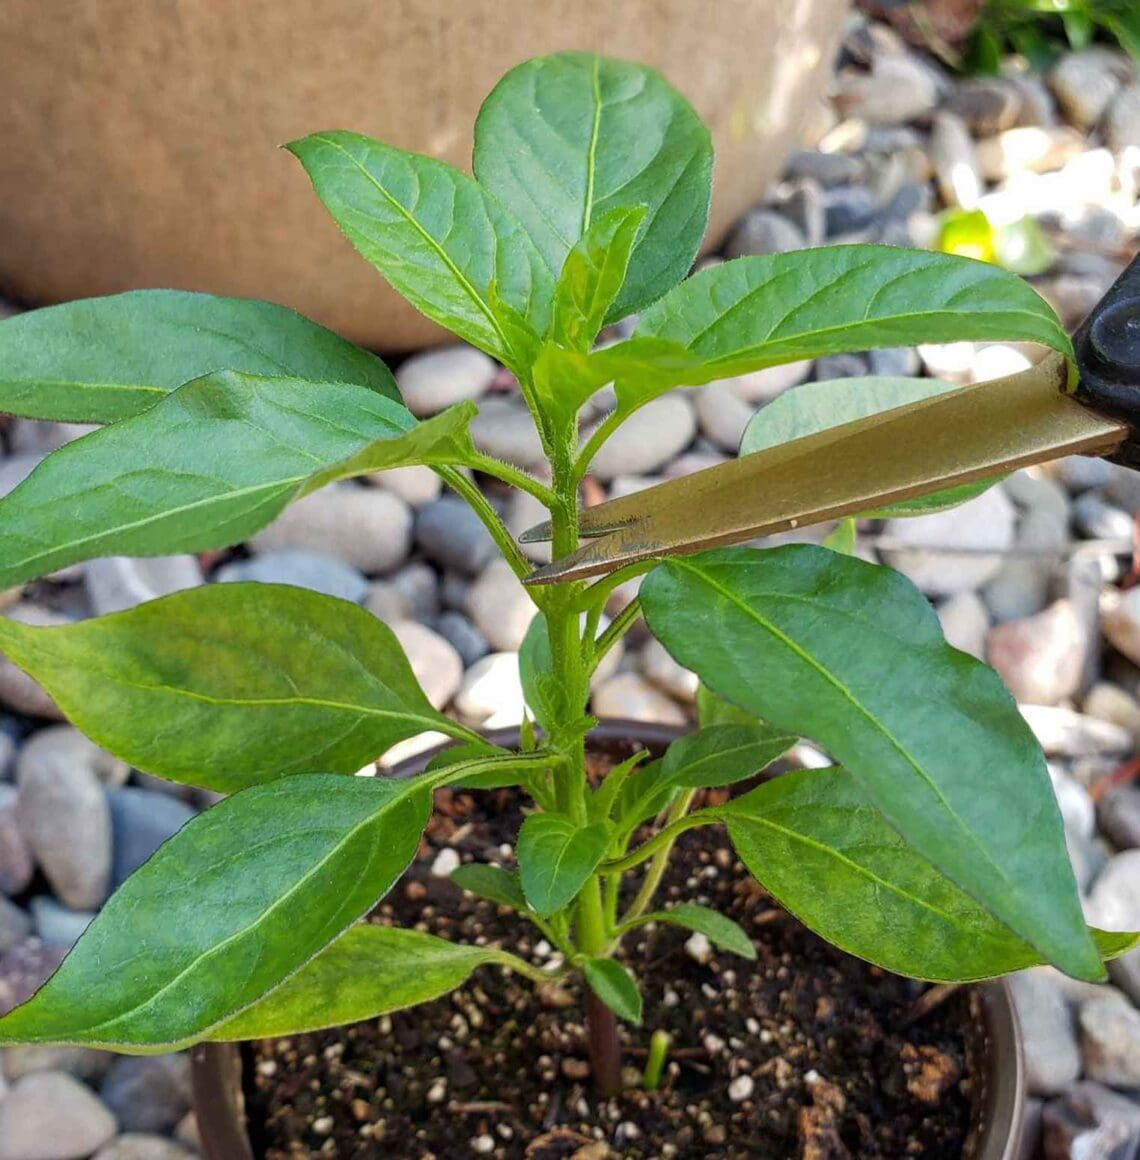 Do peppers need a lot of nitrogen